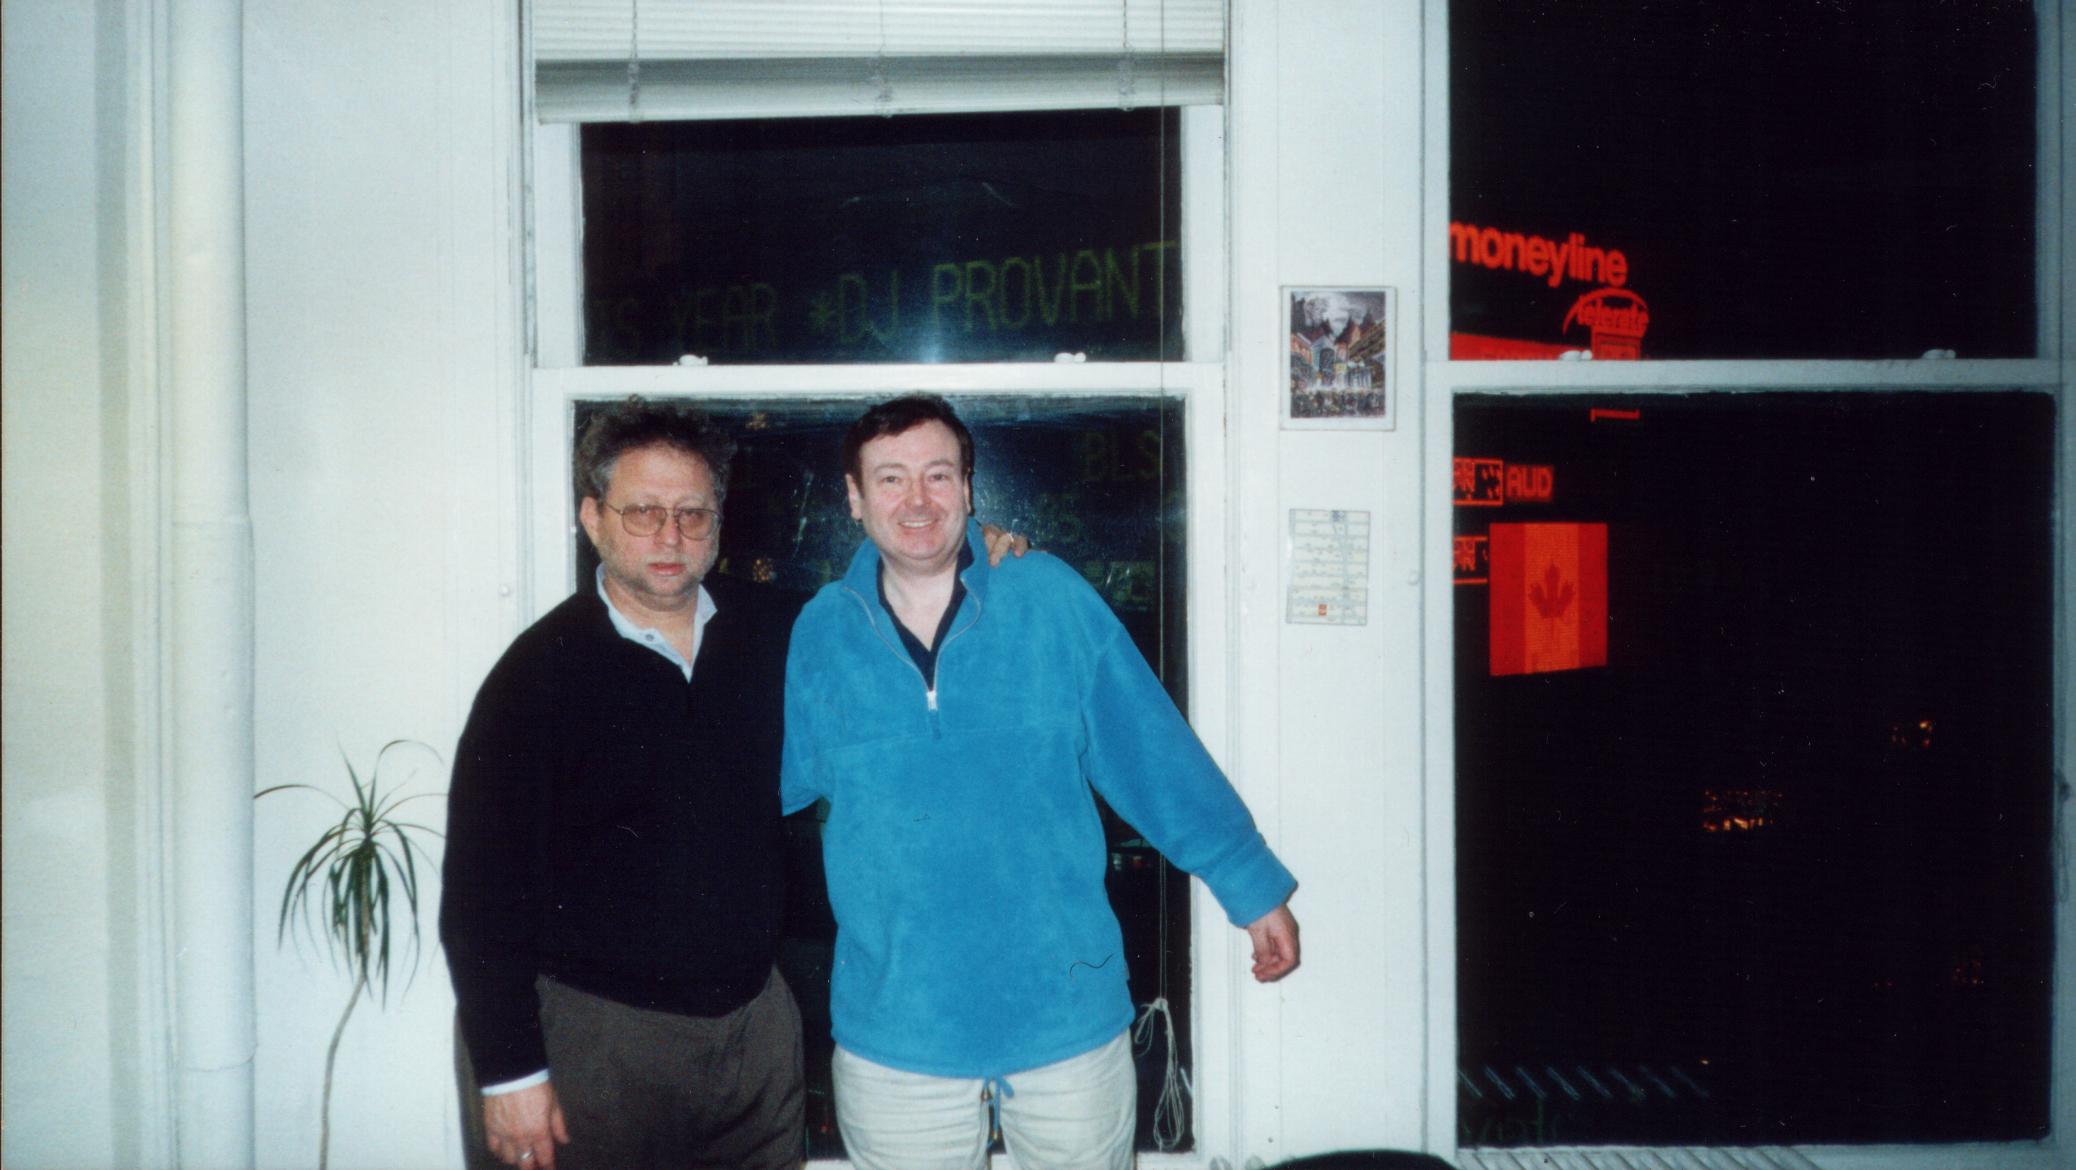 Danny with Paul at Globalvision's old Broadway office in 2002.